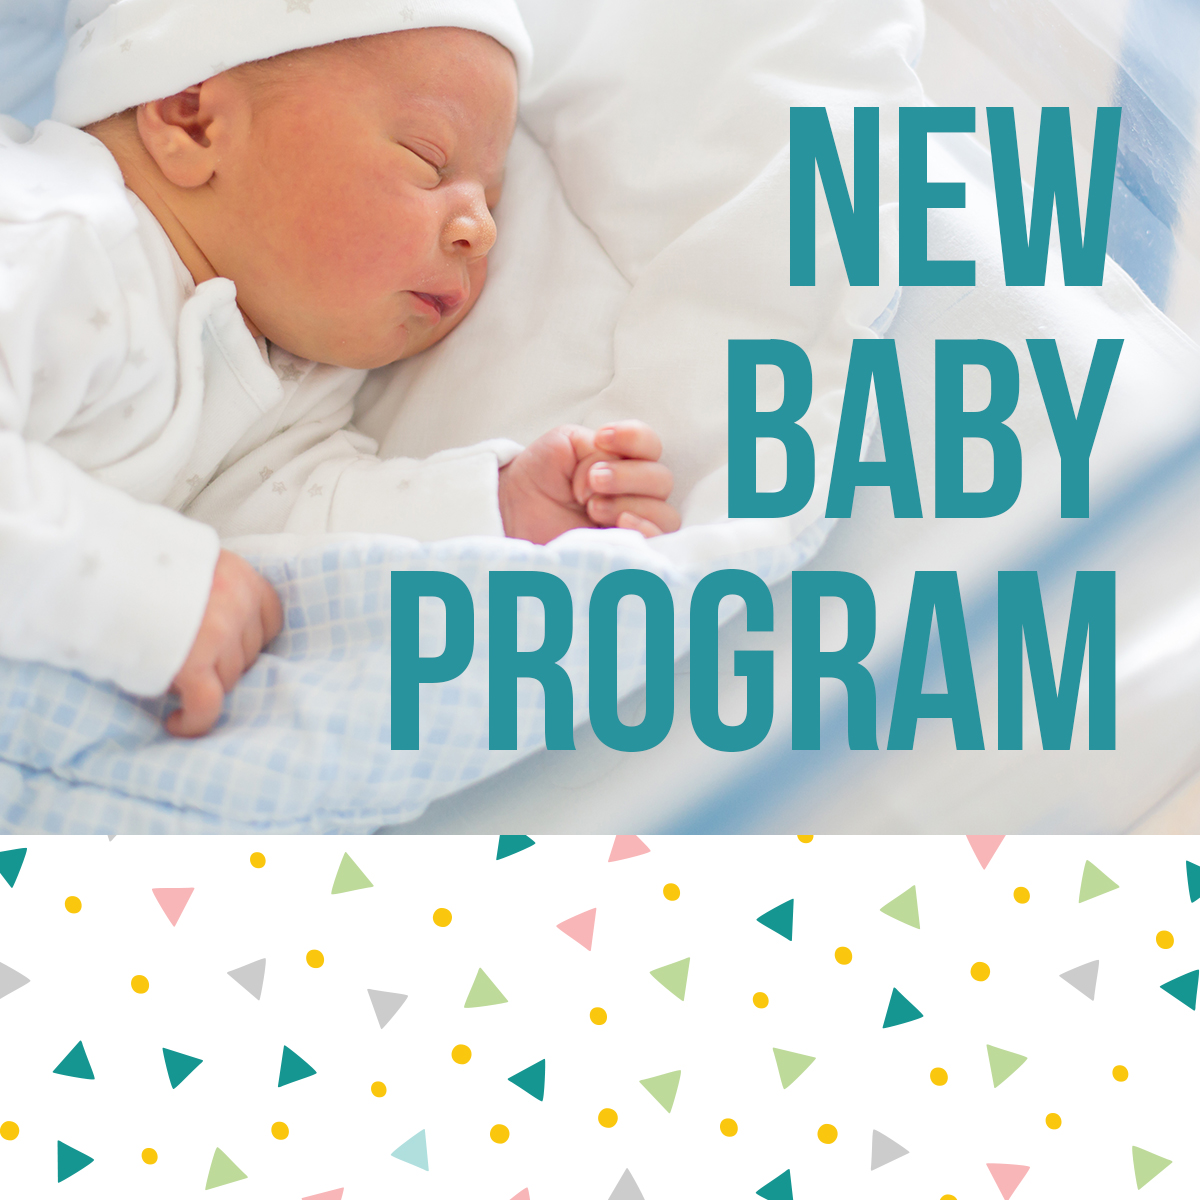 CTCUs New Baby Program is here to help your baby thrive financially!